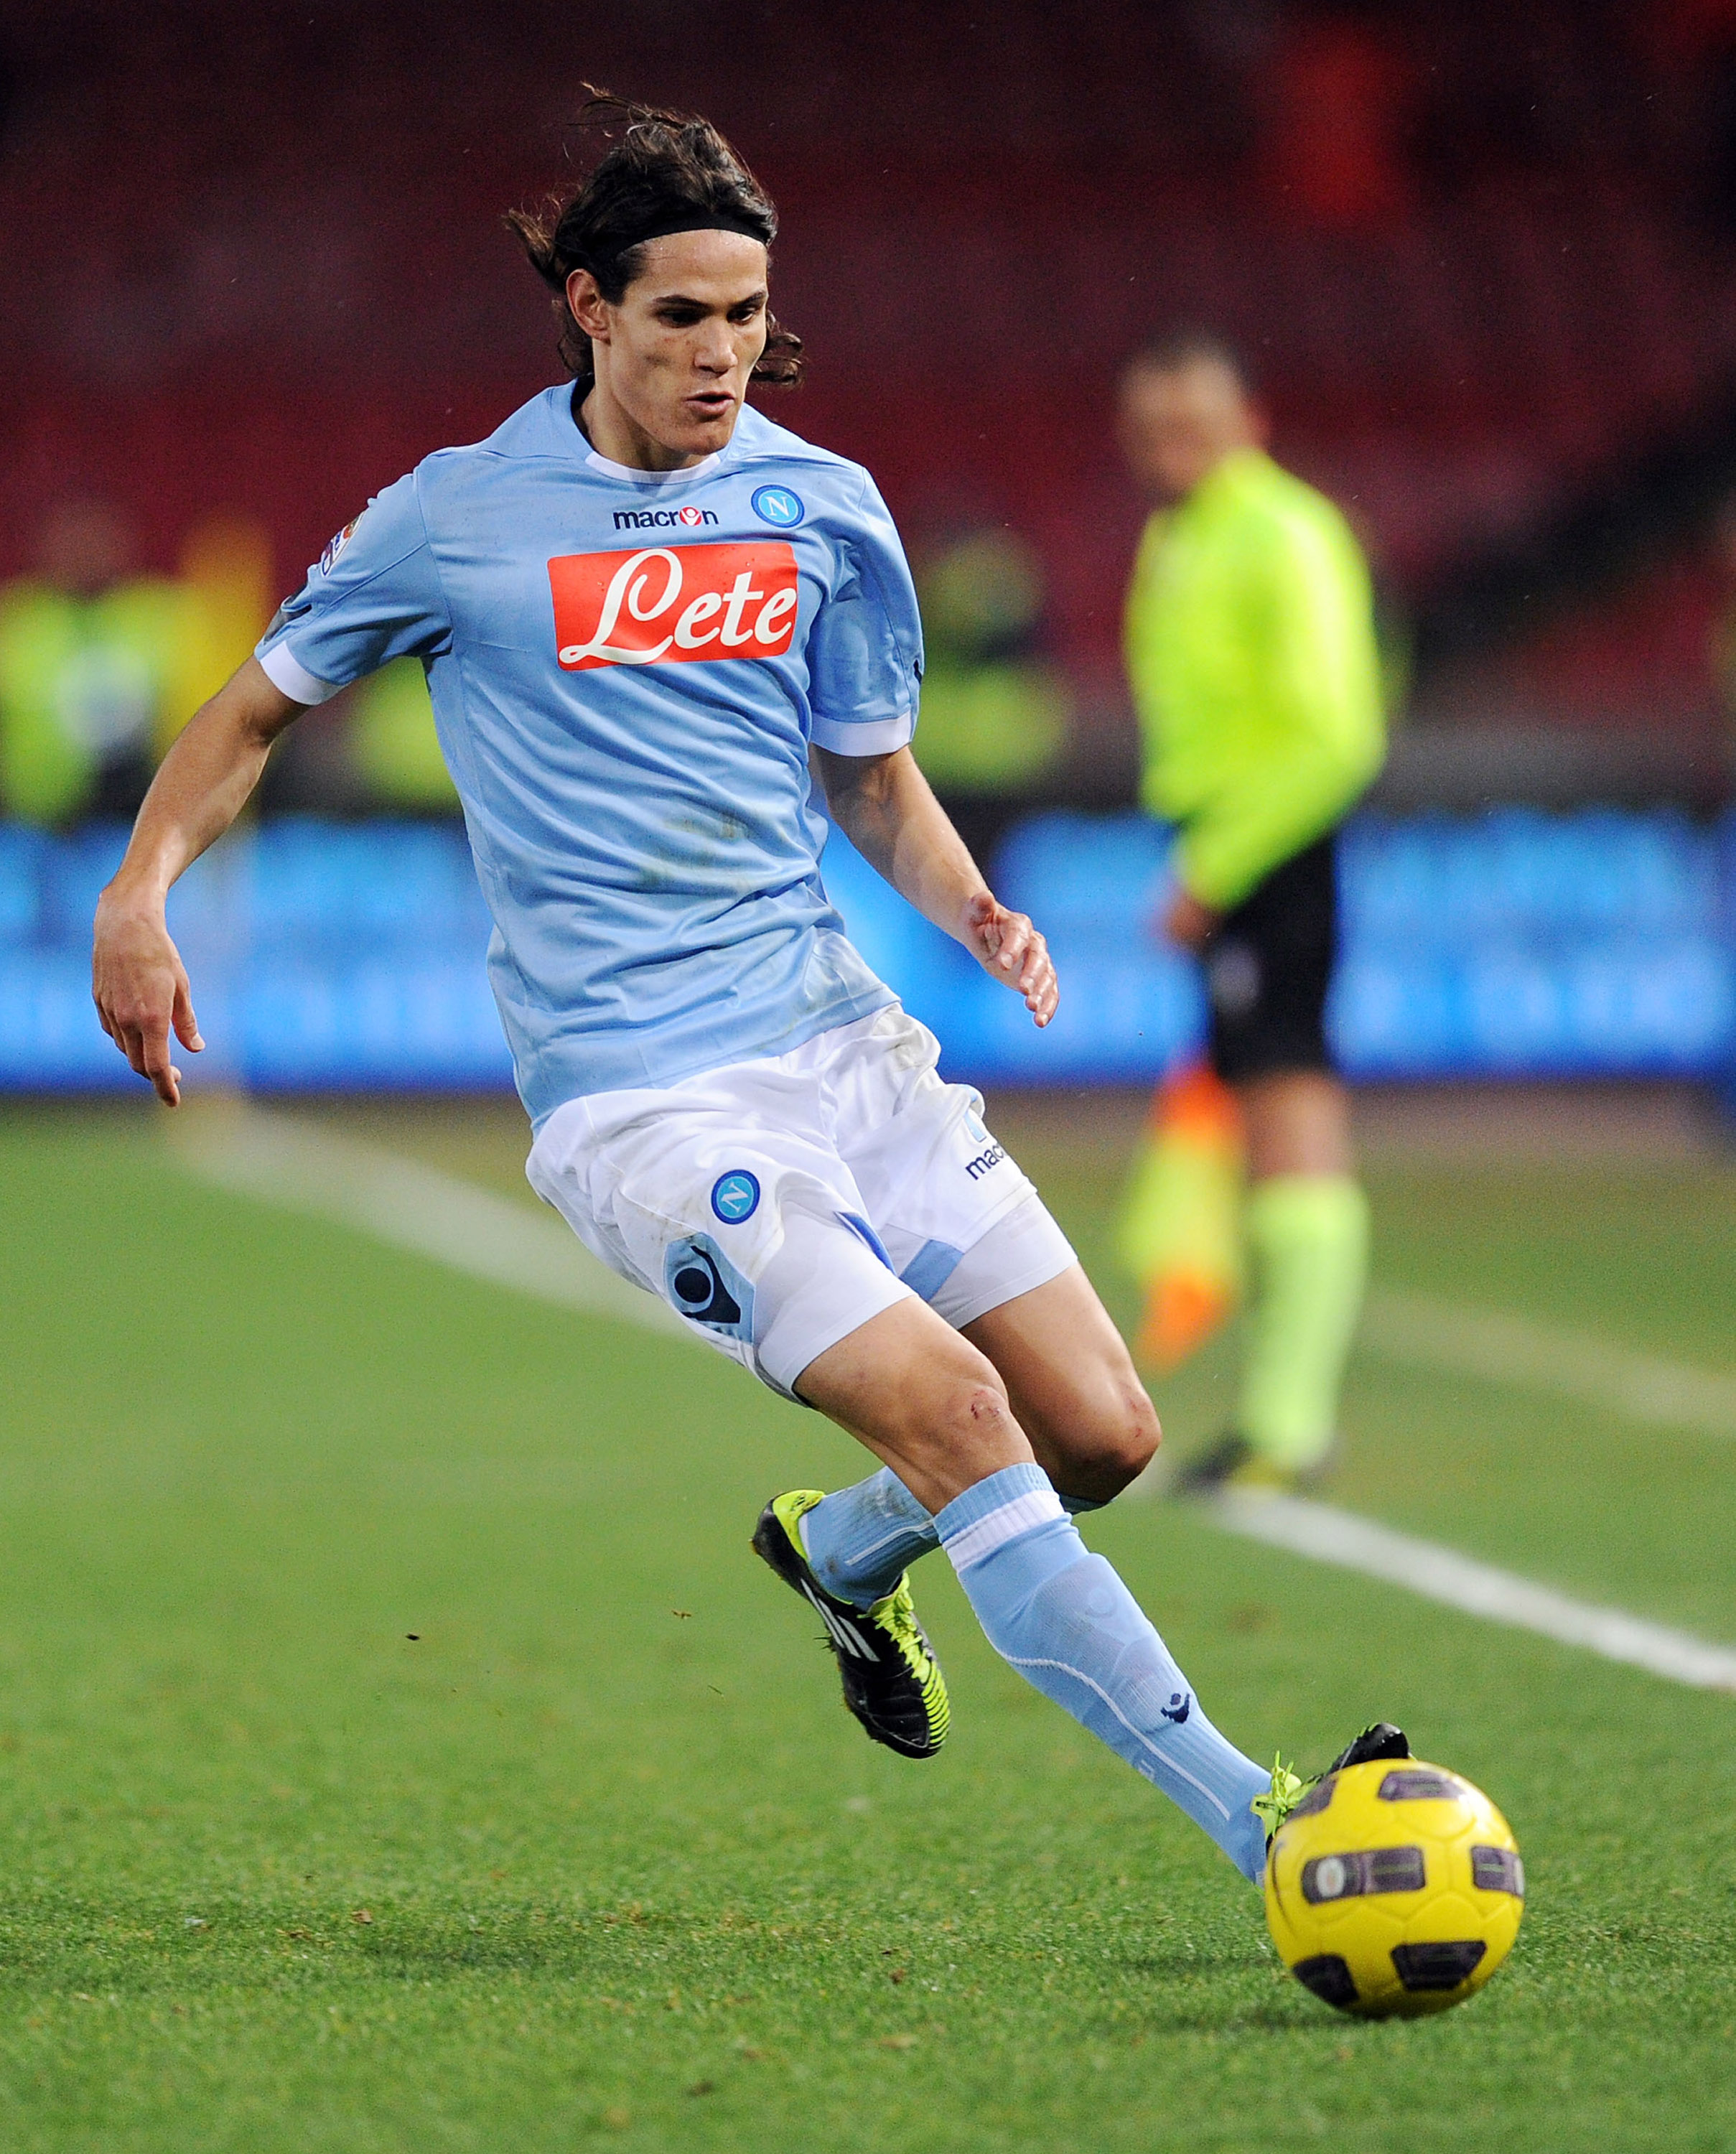 NAPLES, ITALY - FEBRUARY 20:  Edinson Cavani of Napoli in action during the Serie A match between SSC Napoli and Catania Calcio at Stadio San Paolo on February 20, 2011 in Naples, Italy.  (Photo by Giuseppe Bellini/Getty Images)